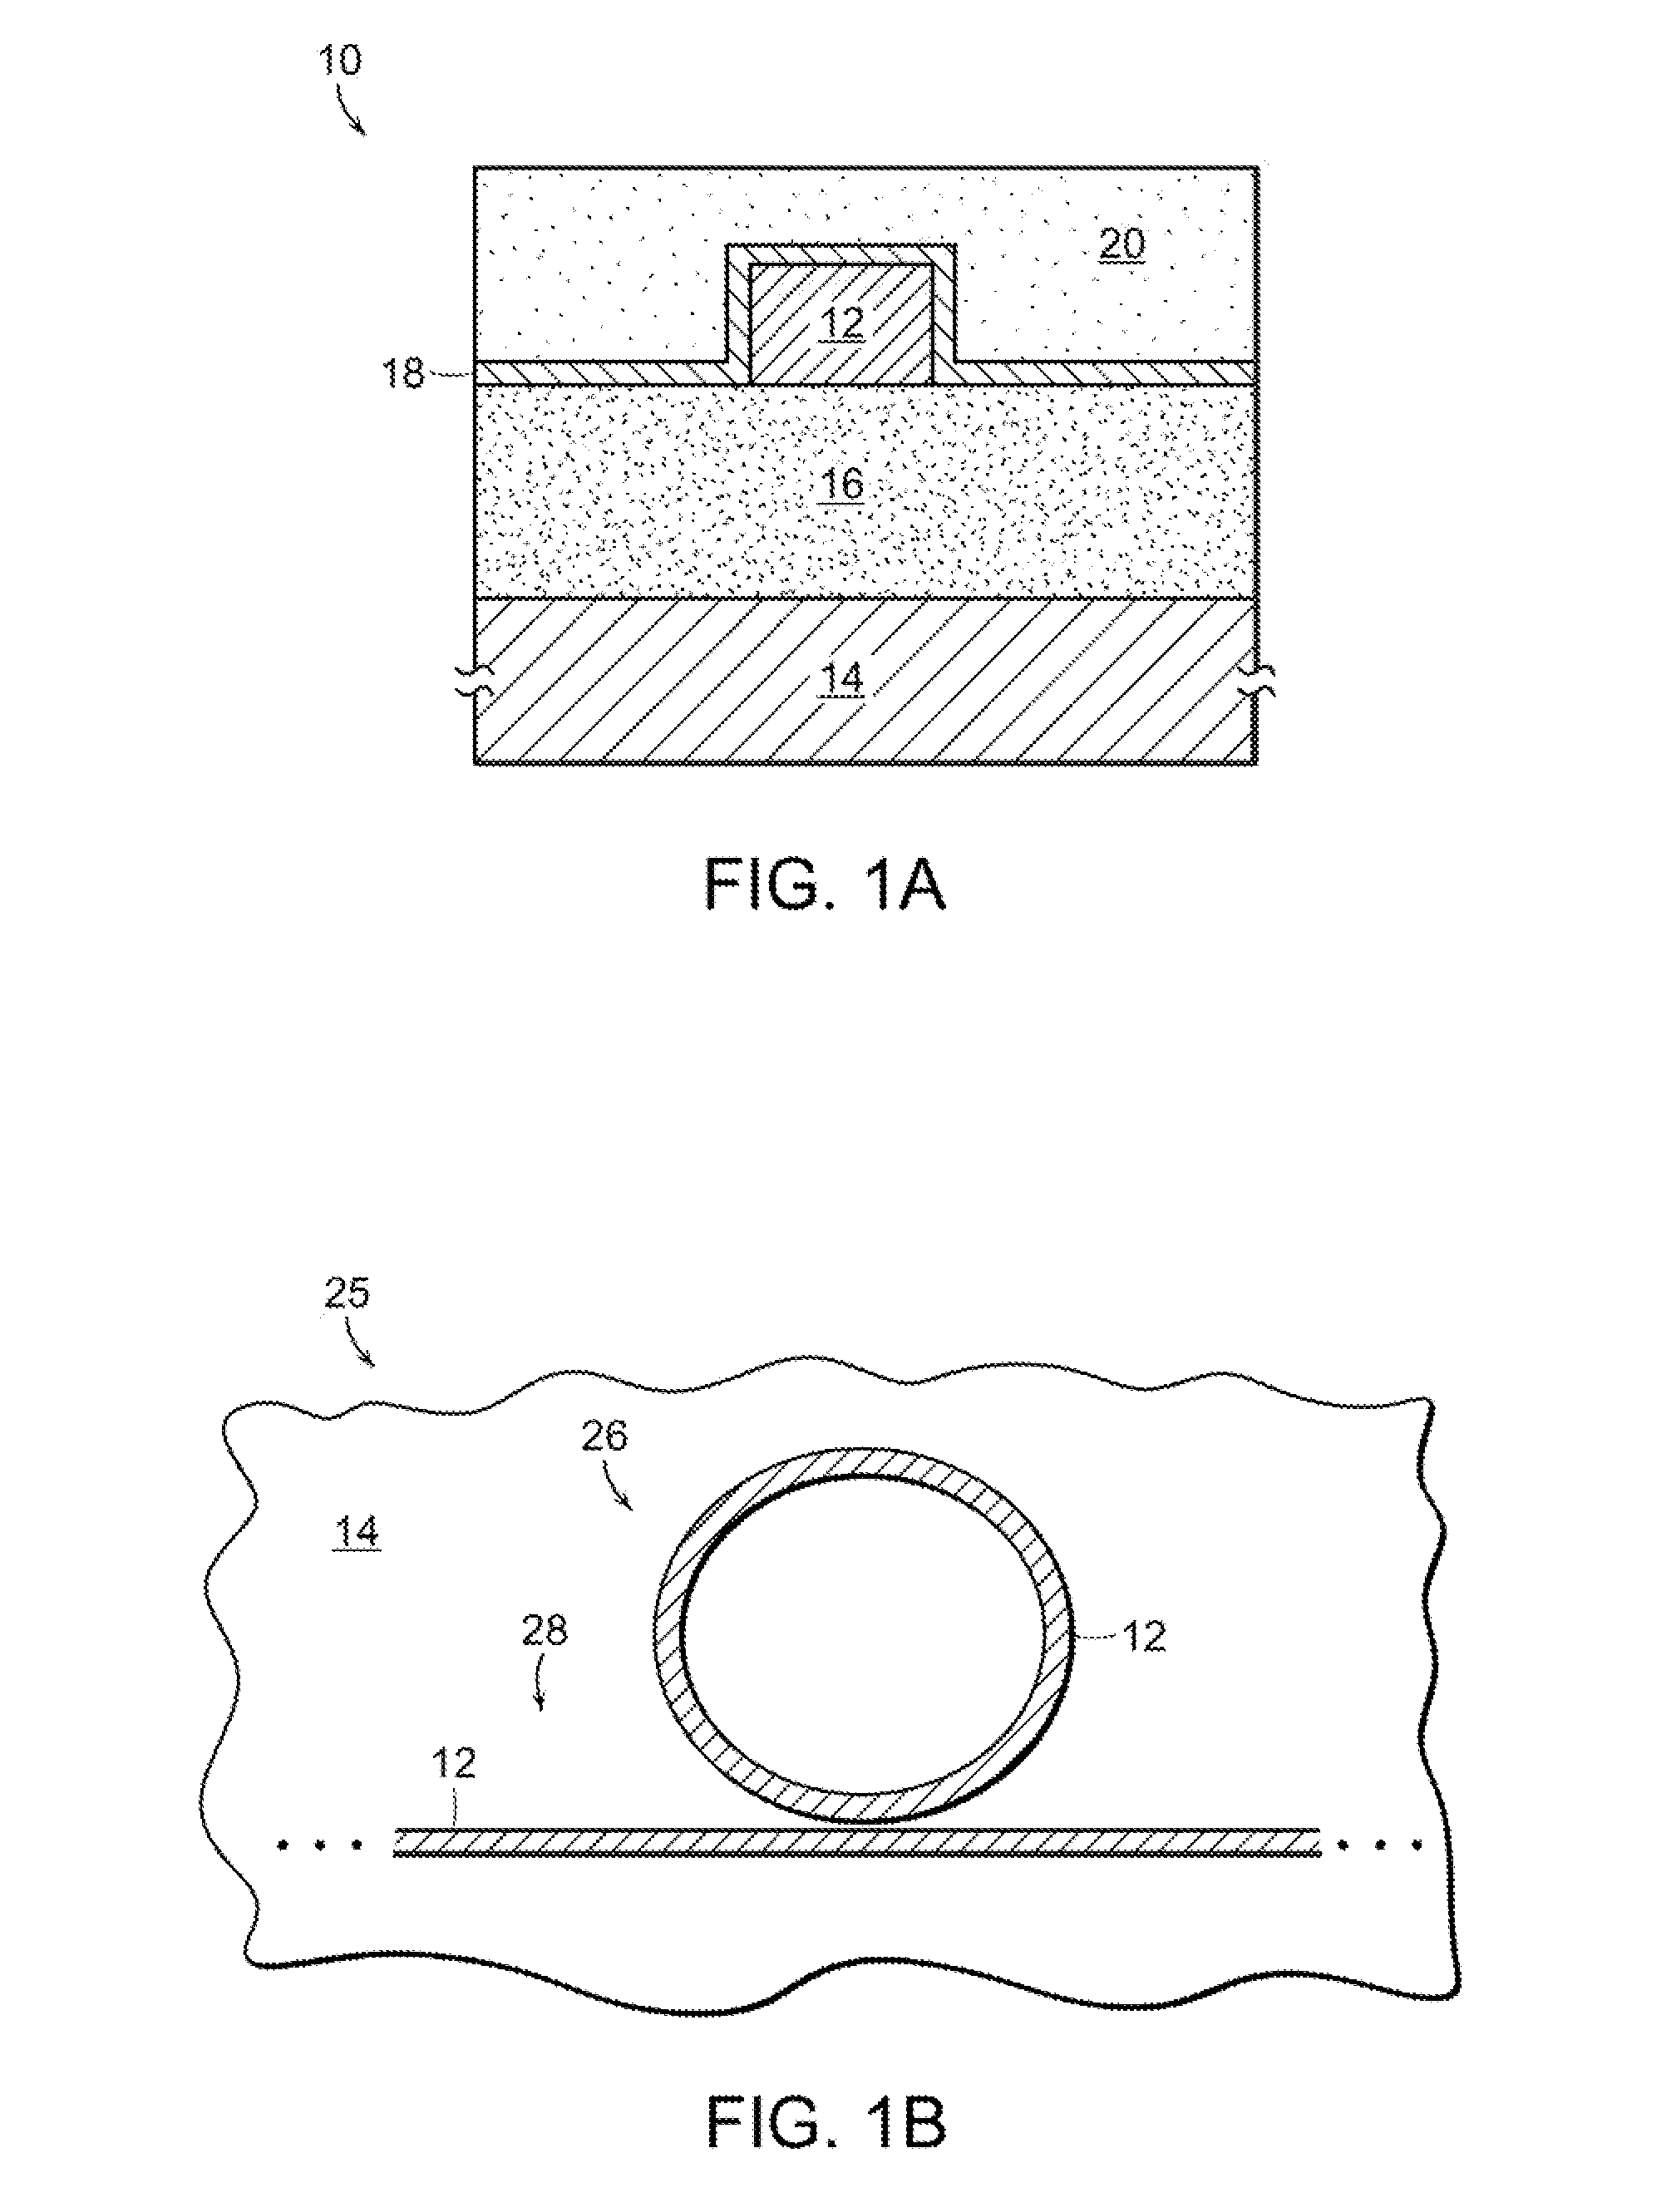 Athermal photonic waveguide with refractive index tuning